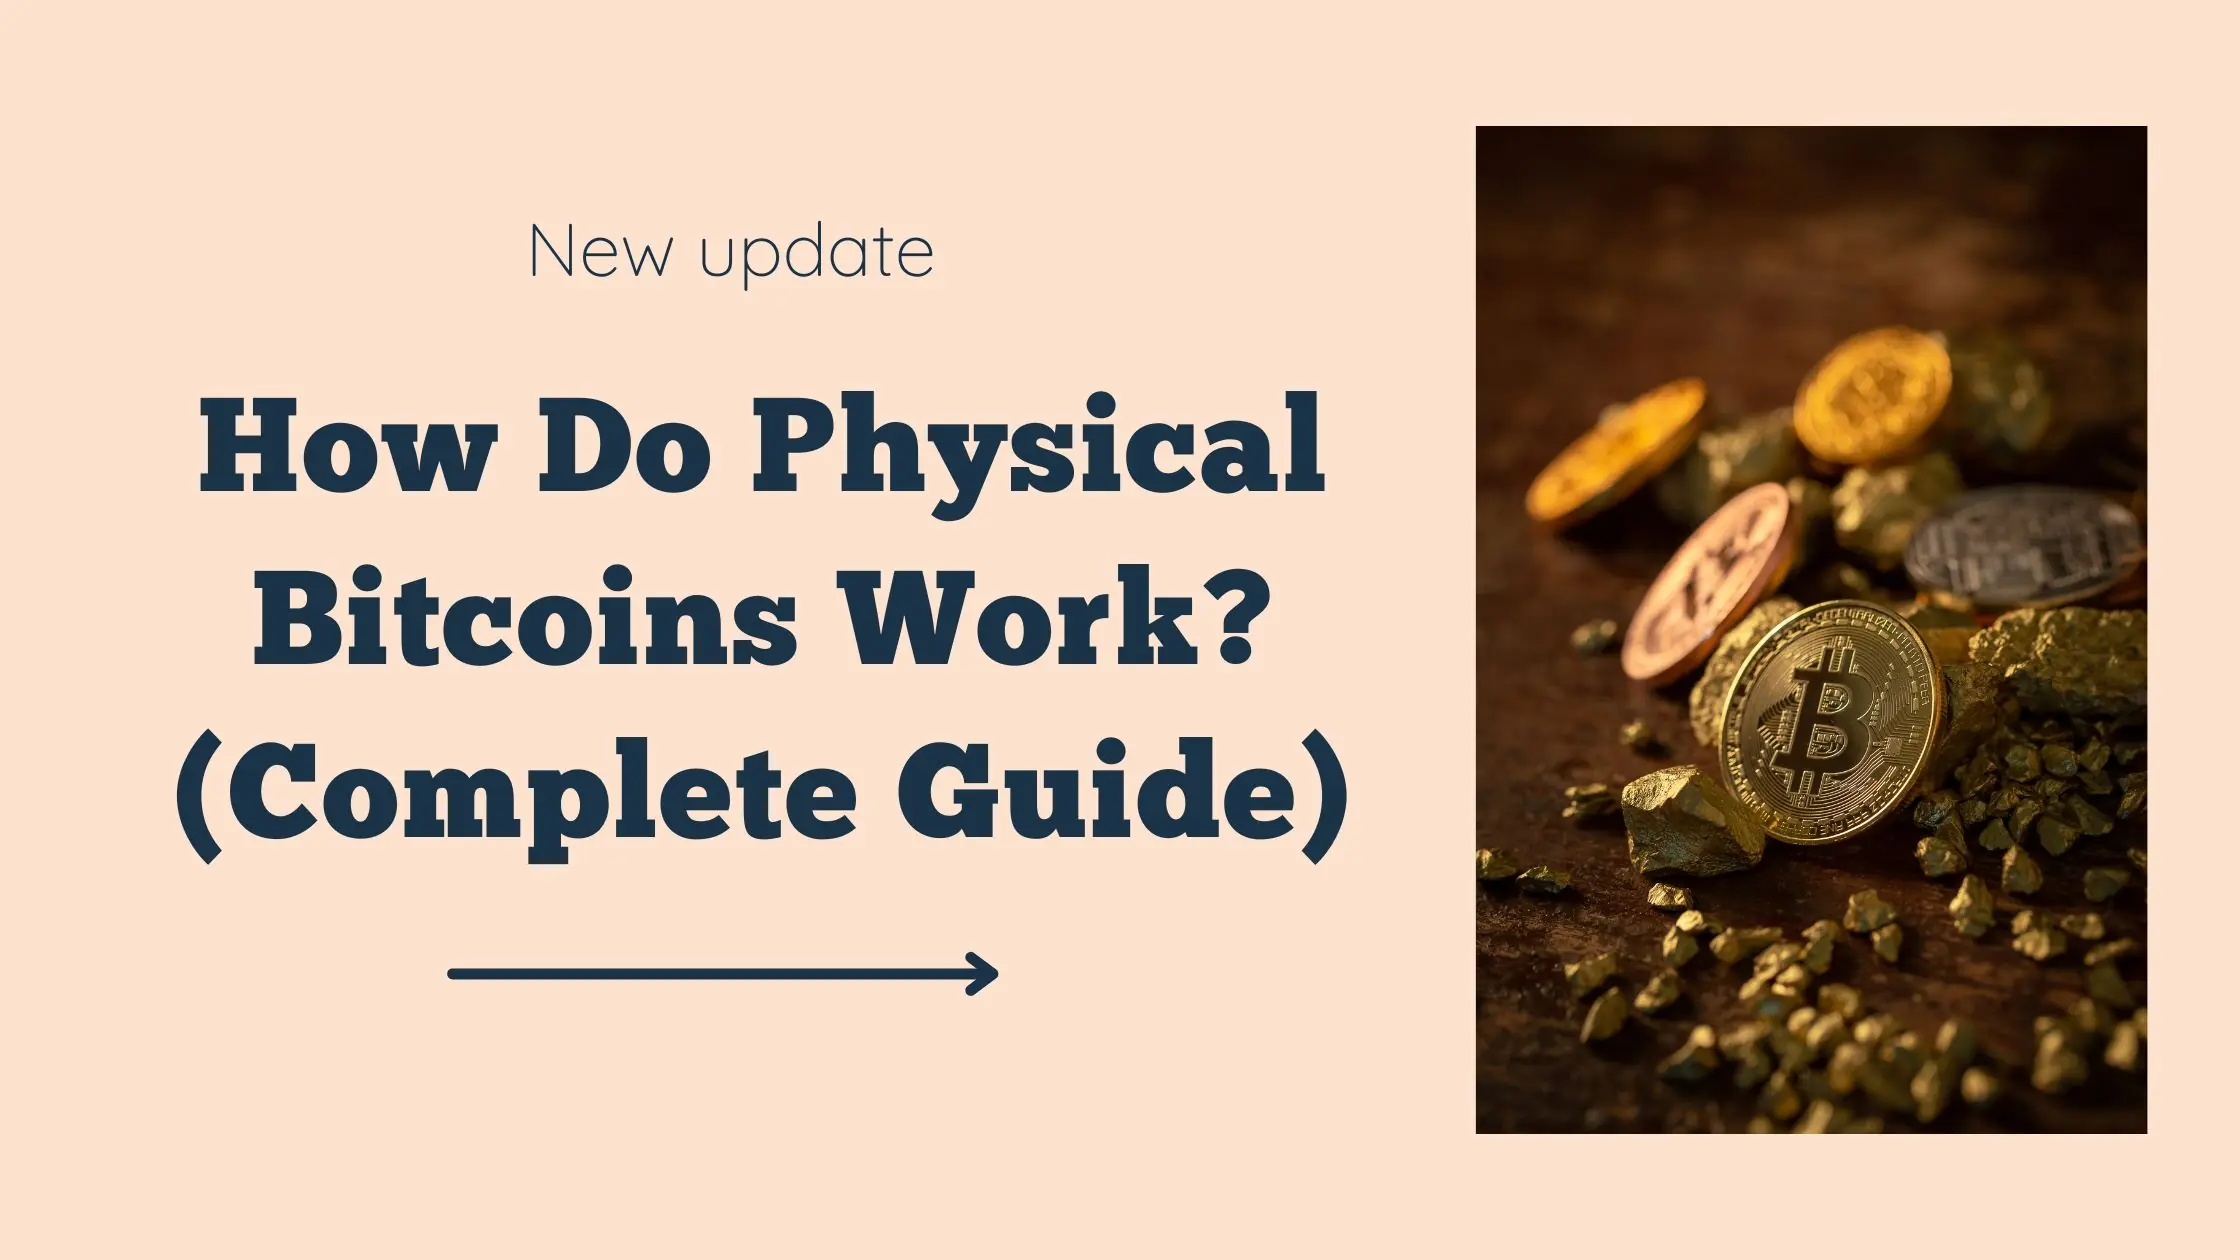 How Do Physical Bitcoins Work? (Complete Guide)